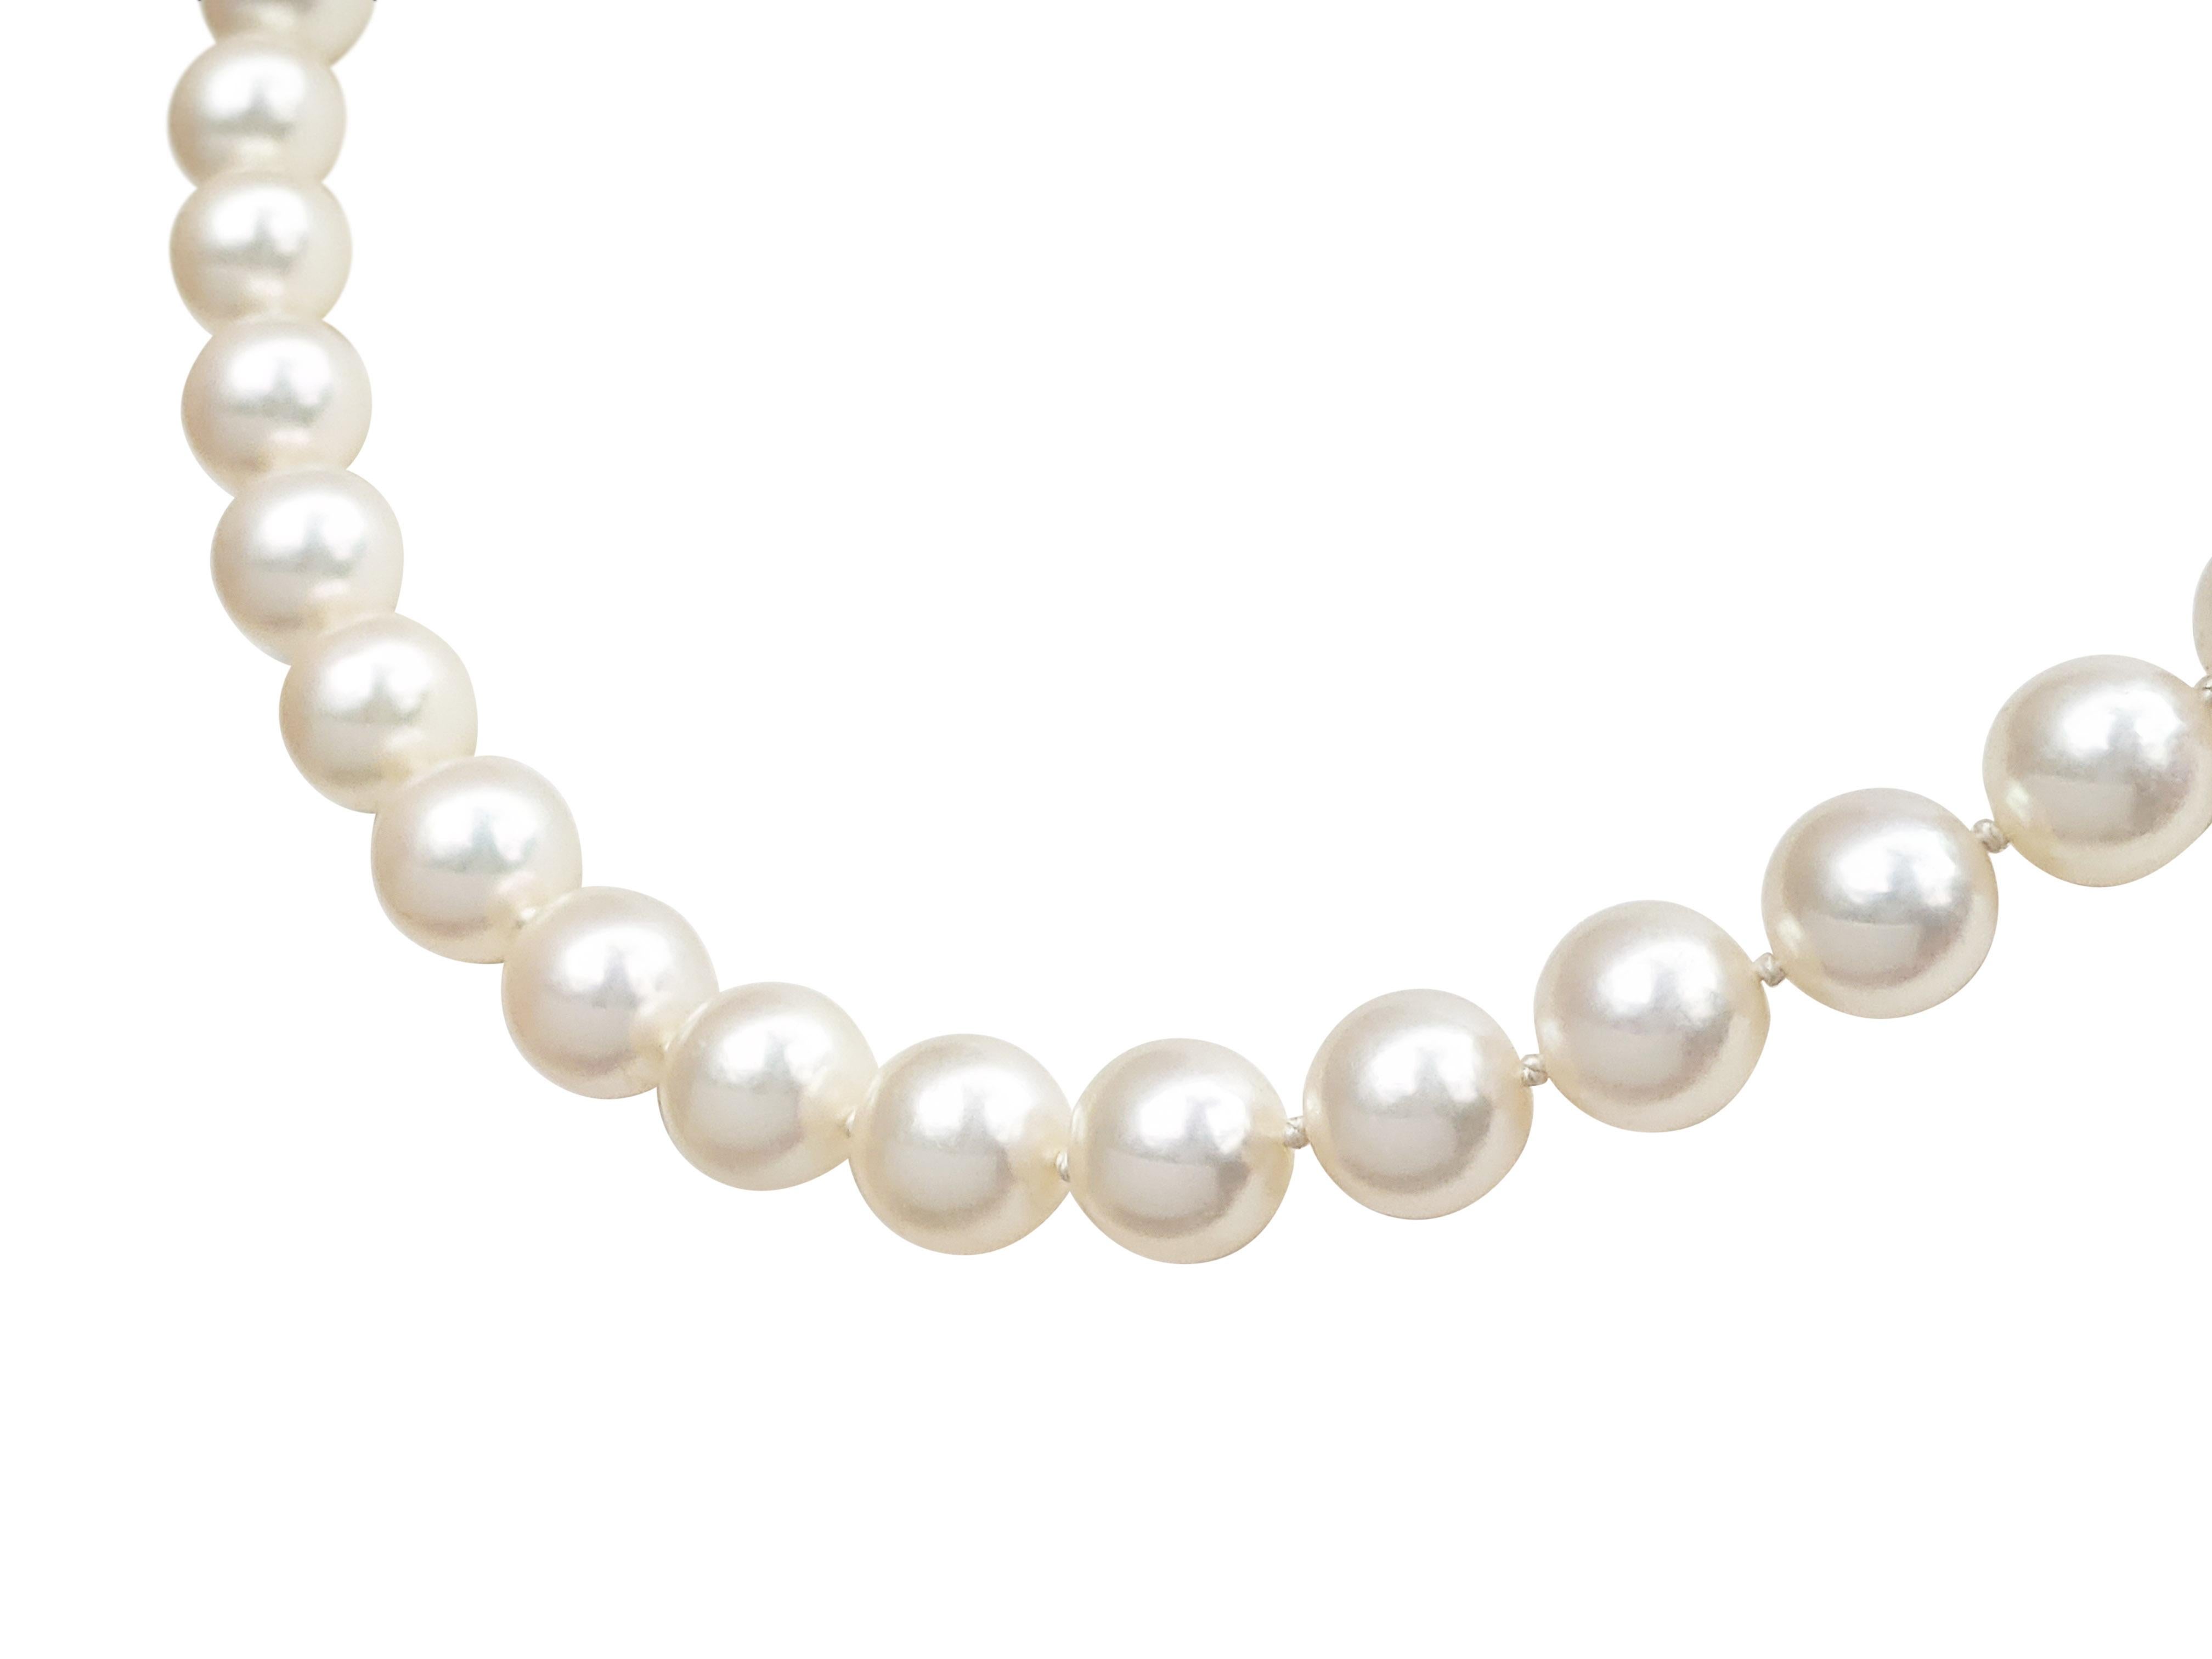 Art Deco $1 NO RESERVE! - 7.5mm Cream Japanese Akoya Pearls, Yellow Gold Necklace